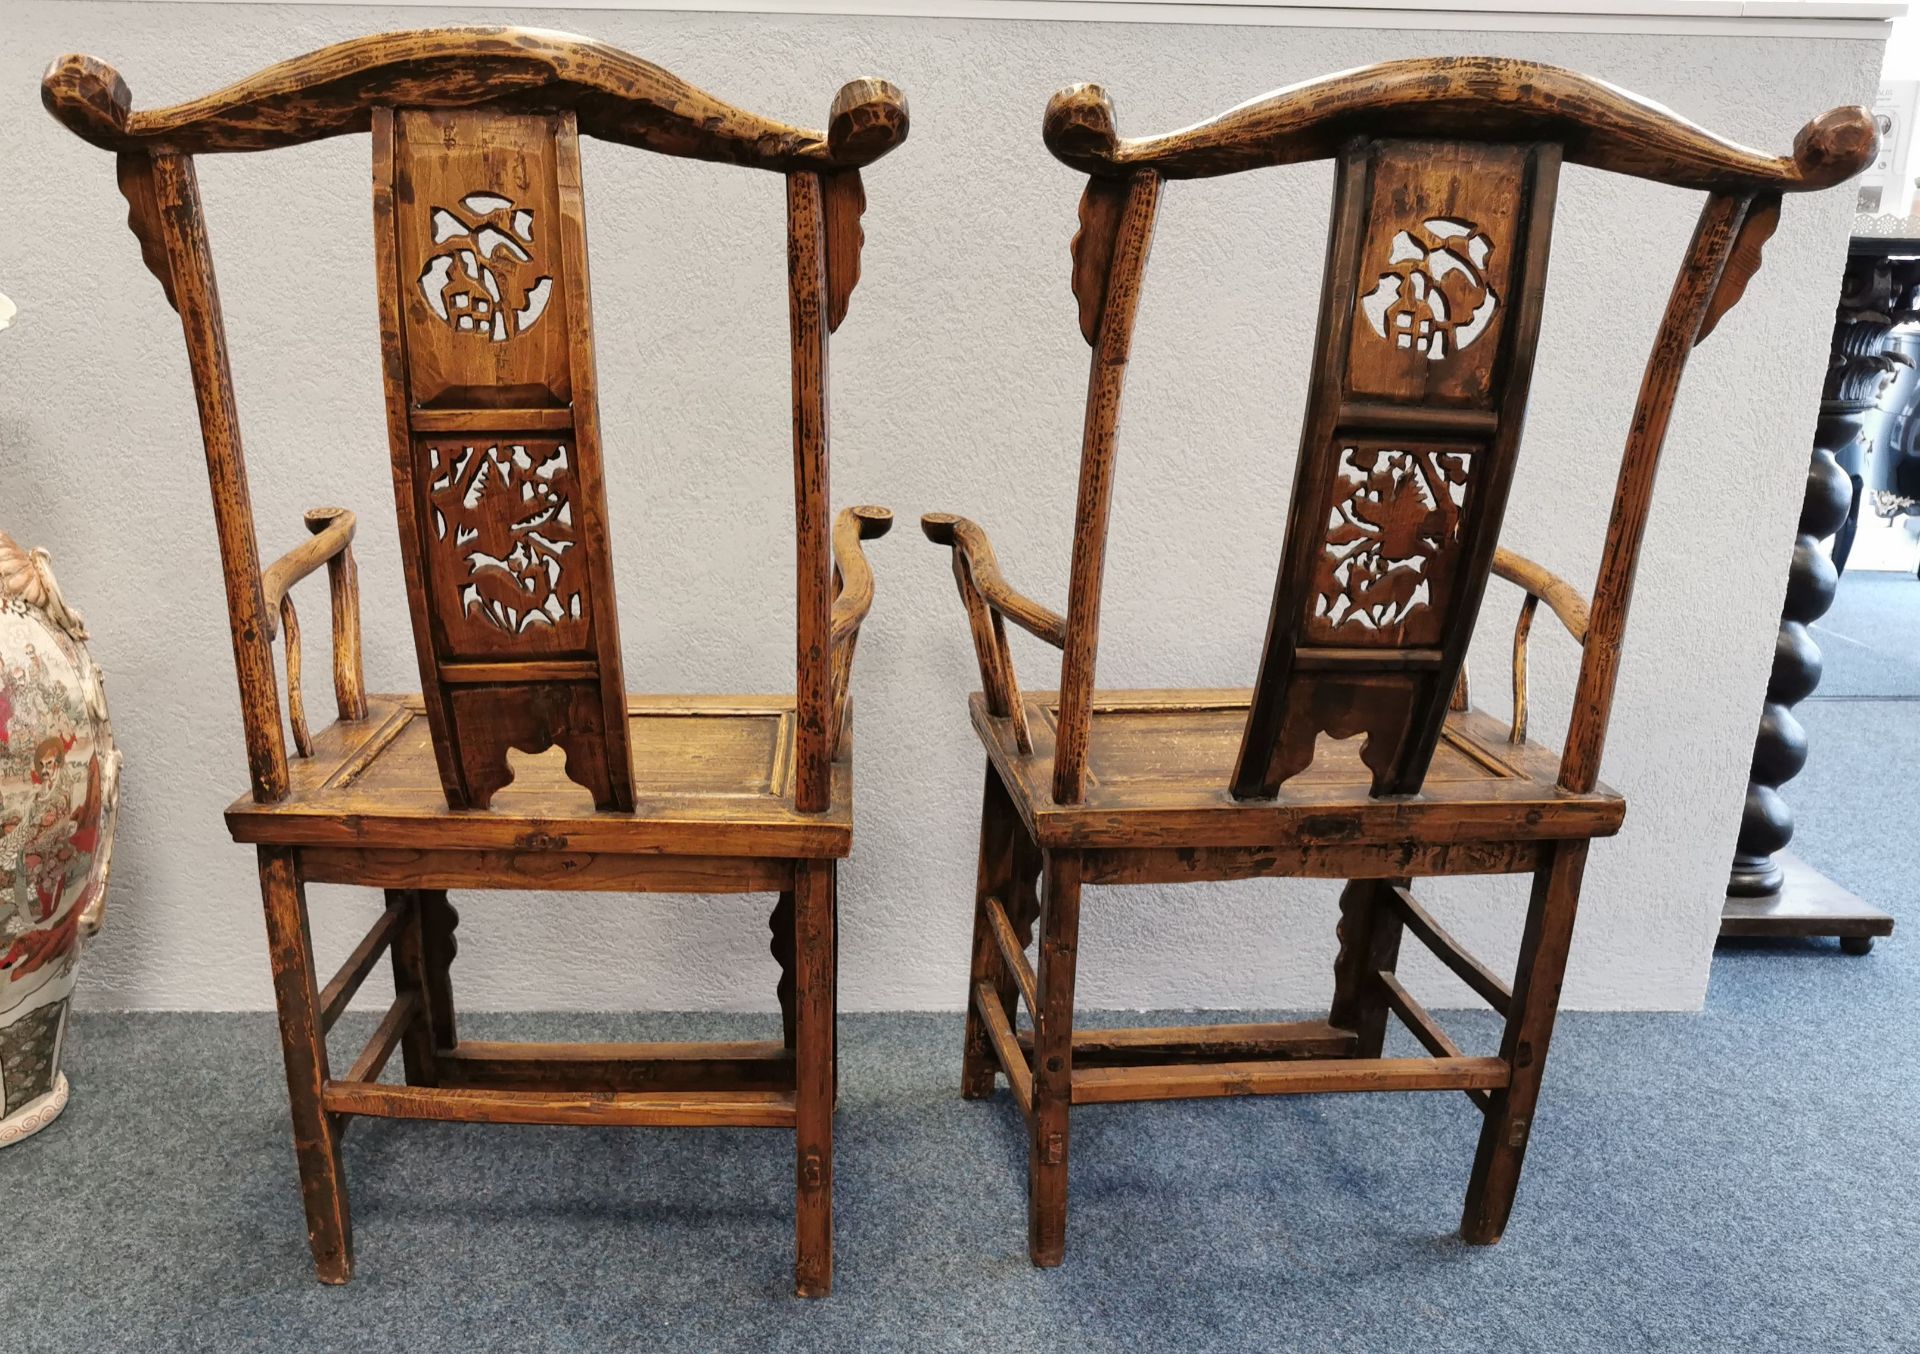 CHNESE ARM CHAIRS - Image 3 of 4